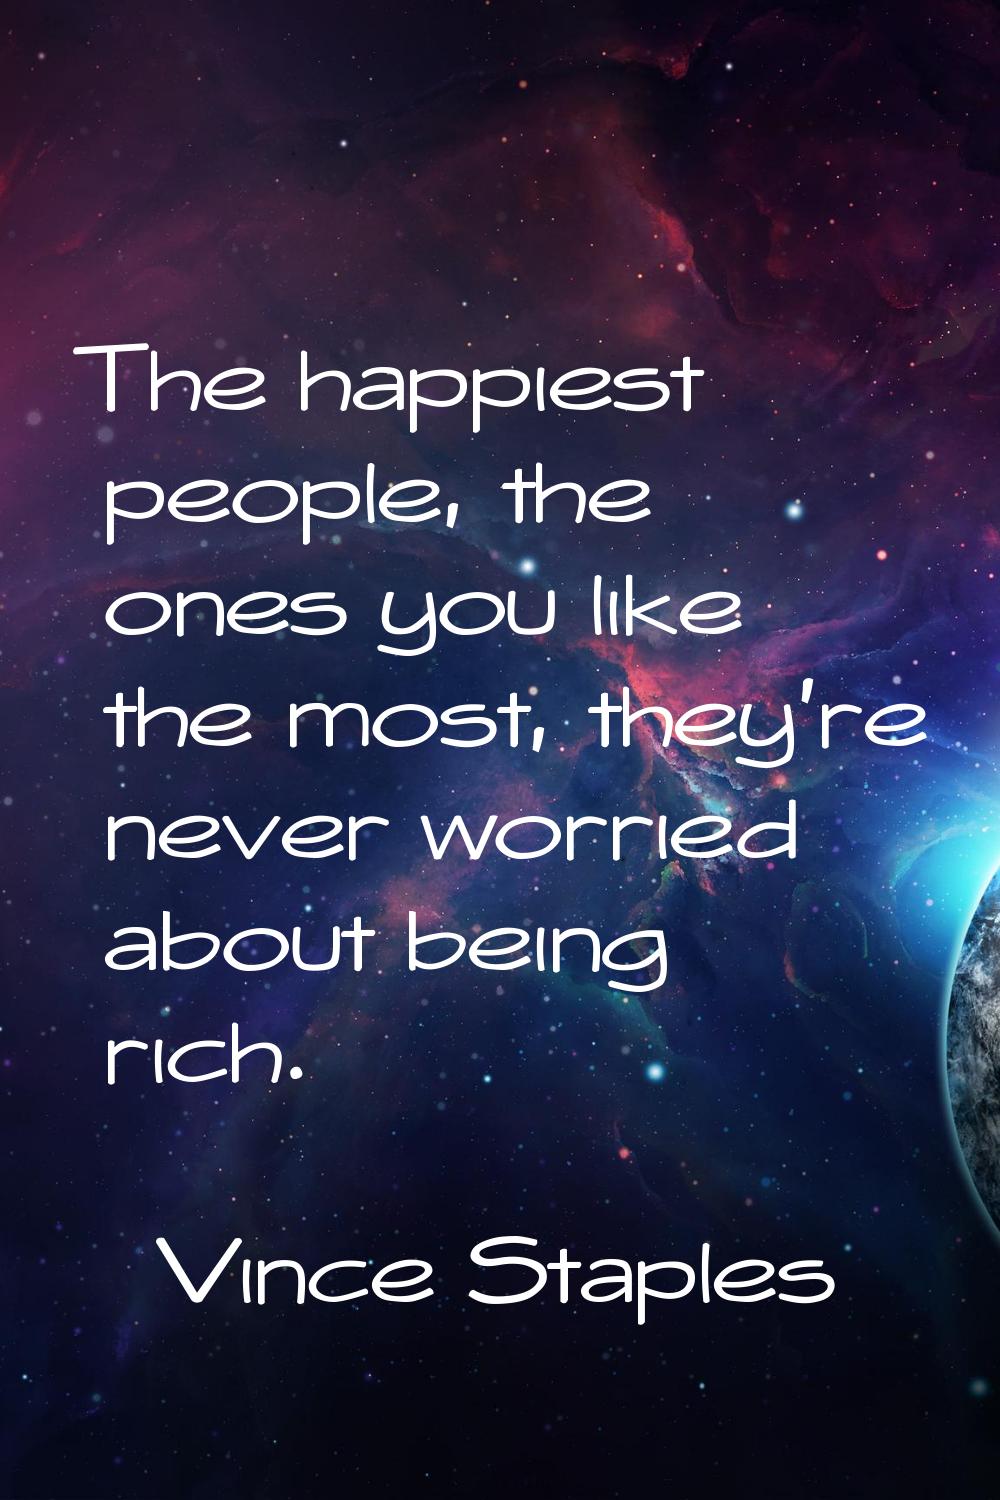 The happiest people, the ones you like the most, they're never worried about being rich.